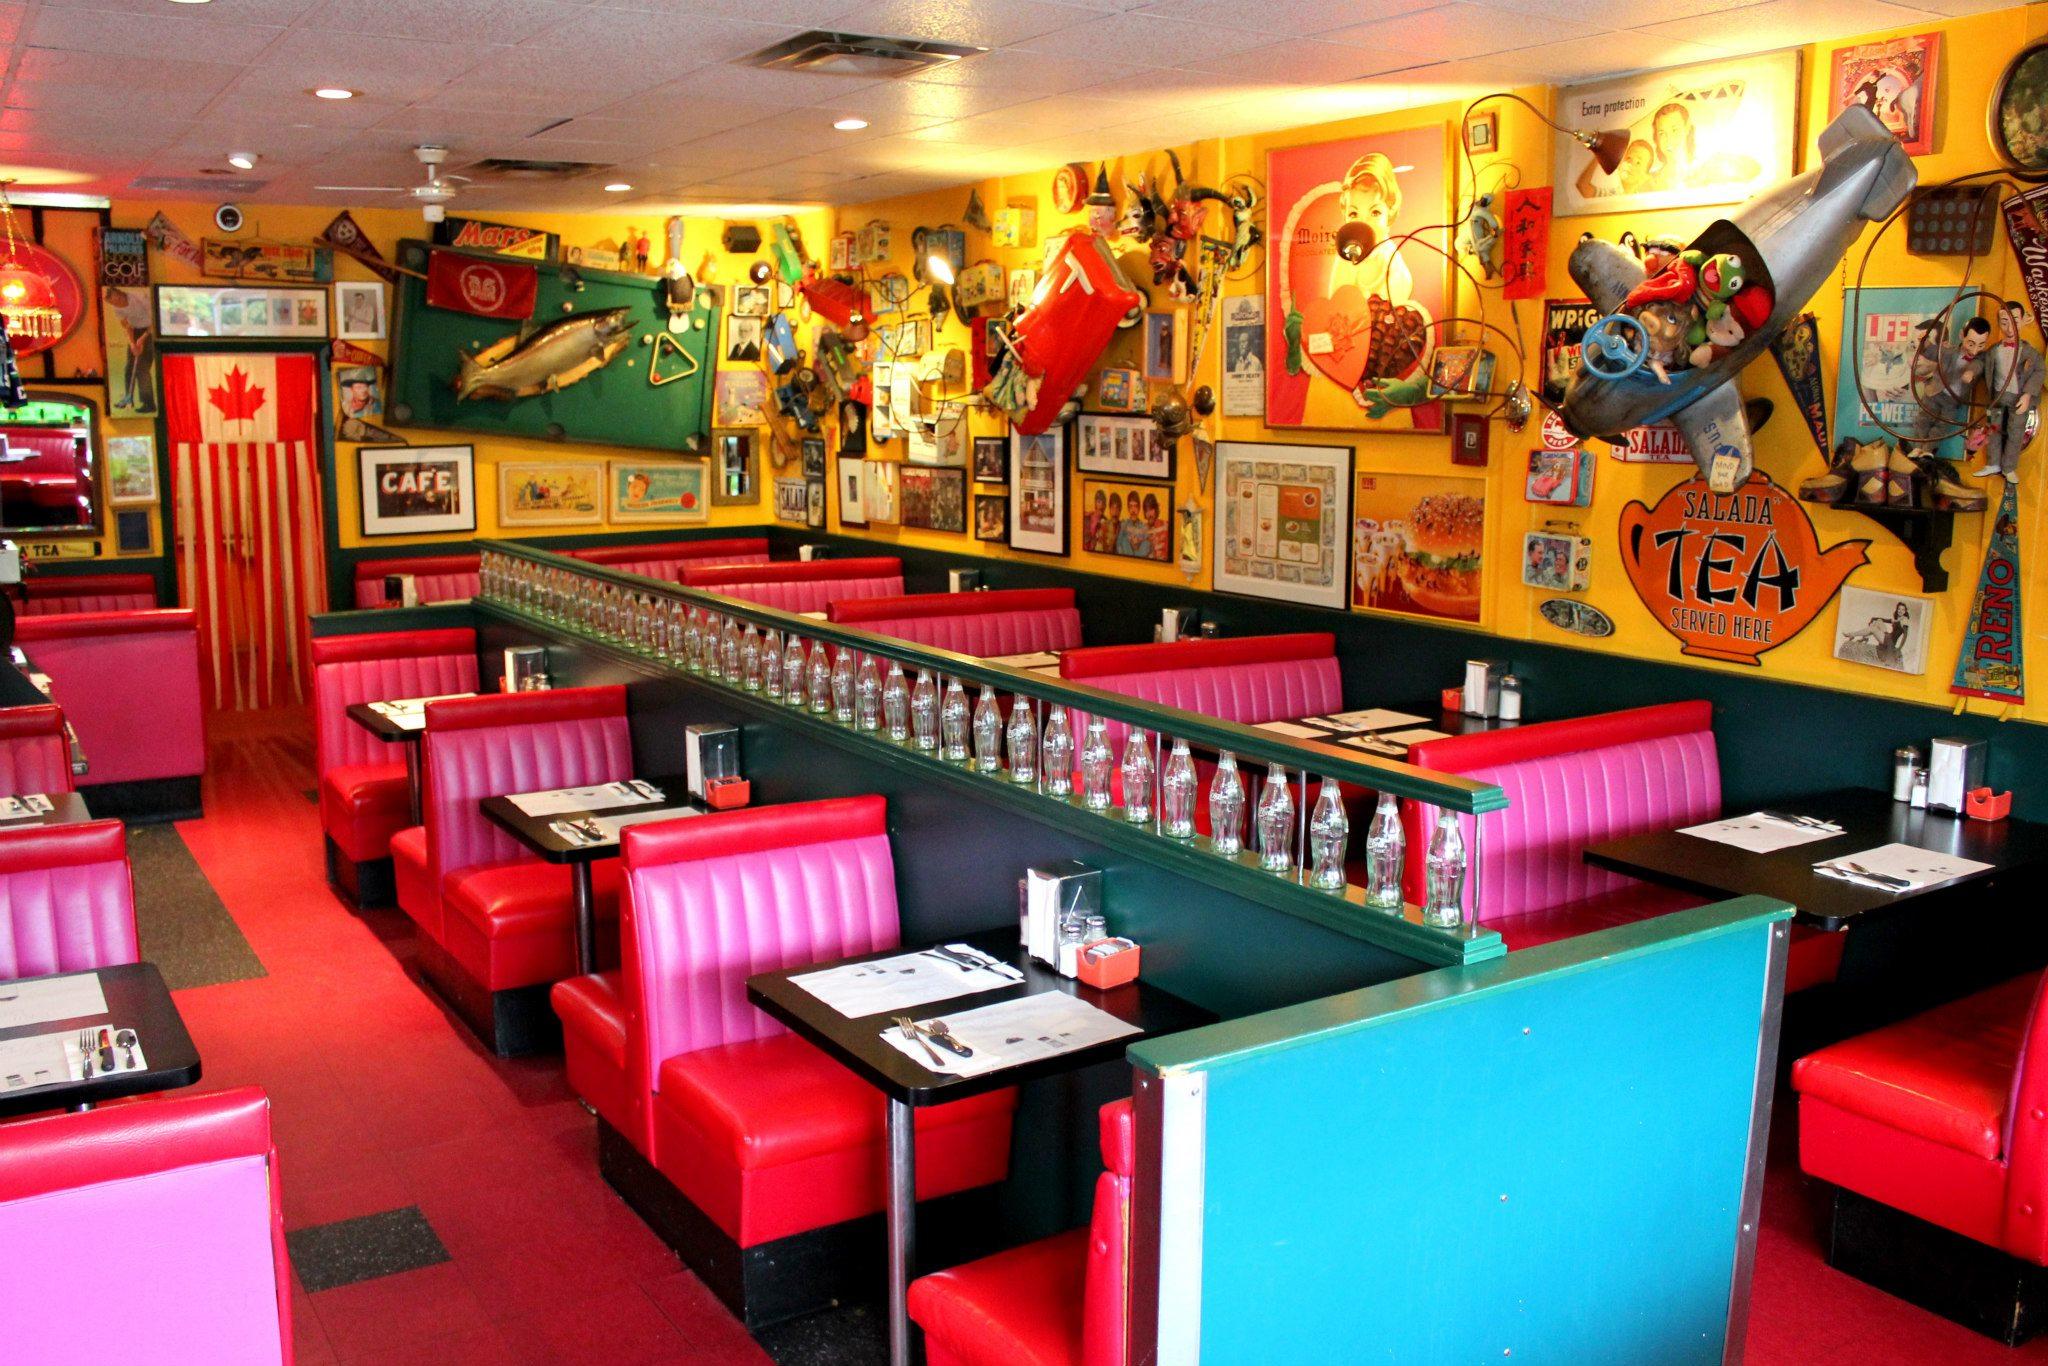 Cover image of this place Sunshine Diner